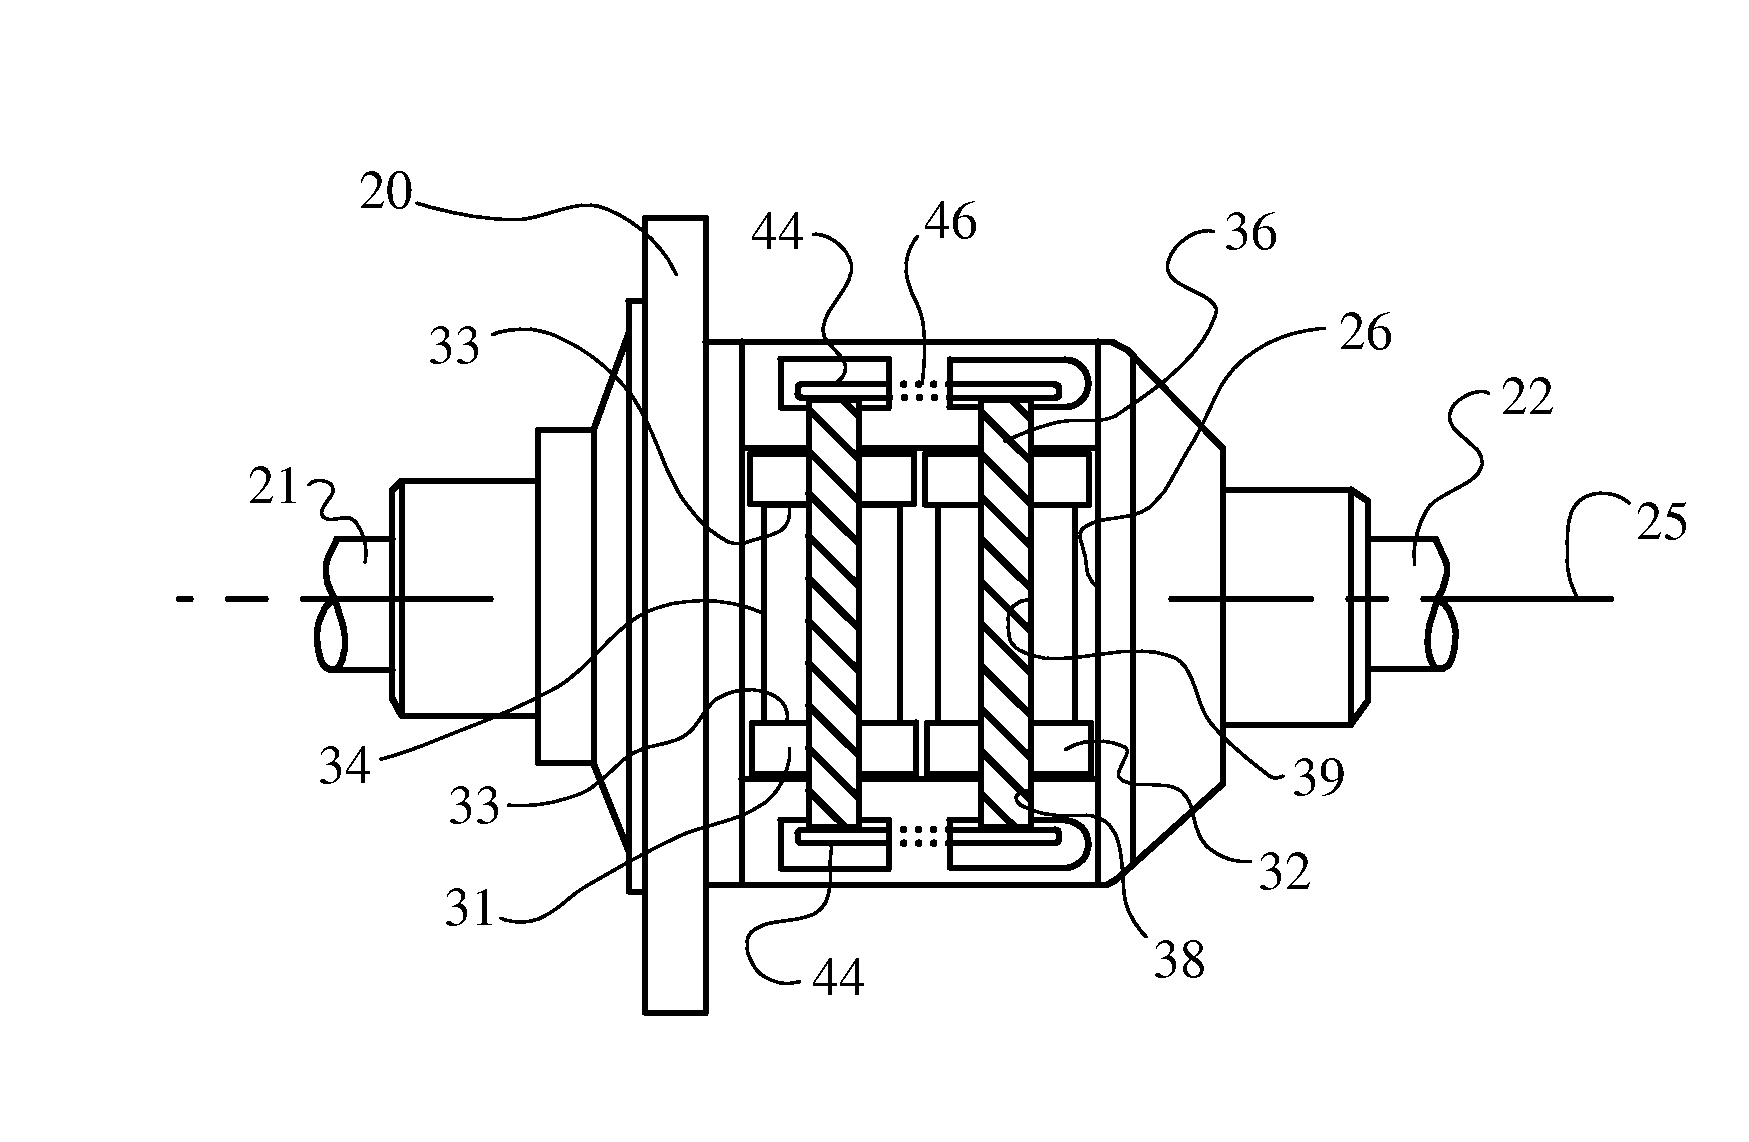 Full traction differential with hybrid gearing